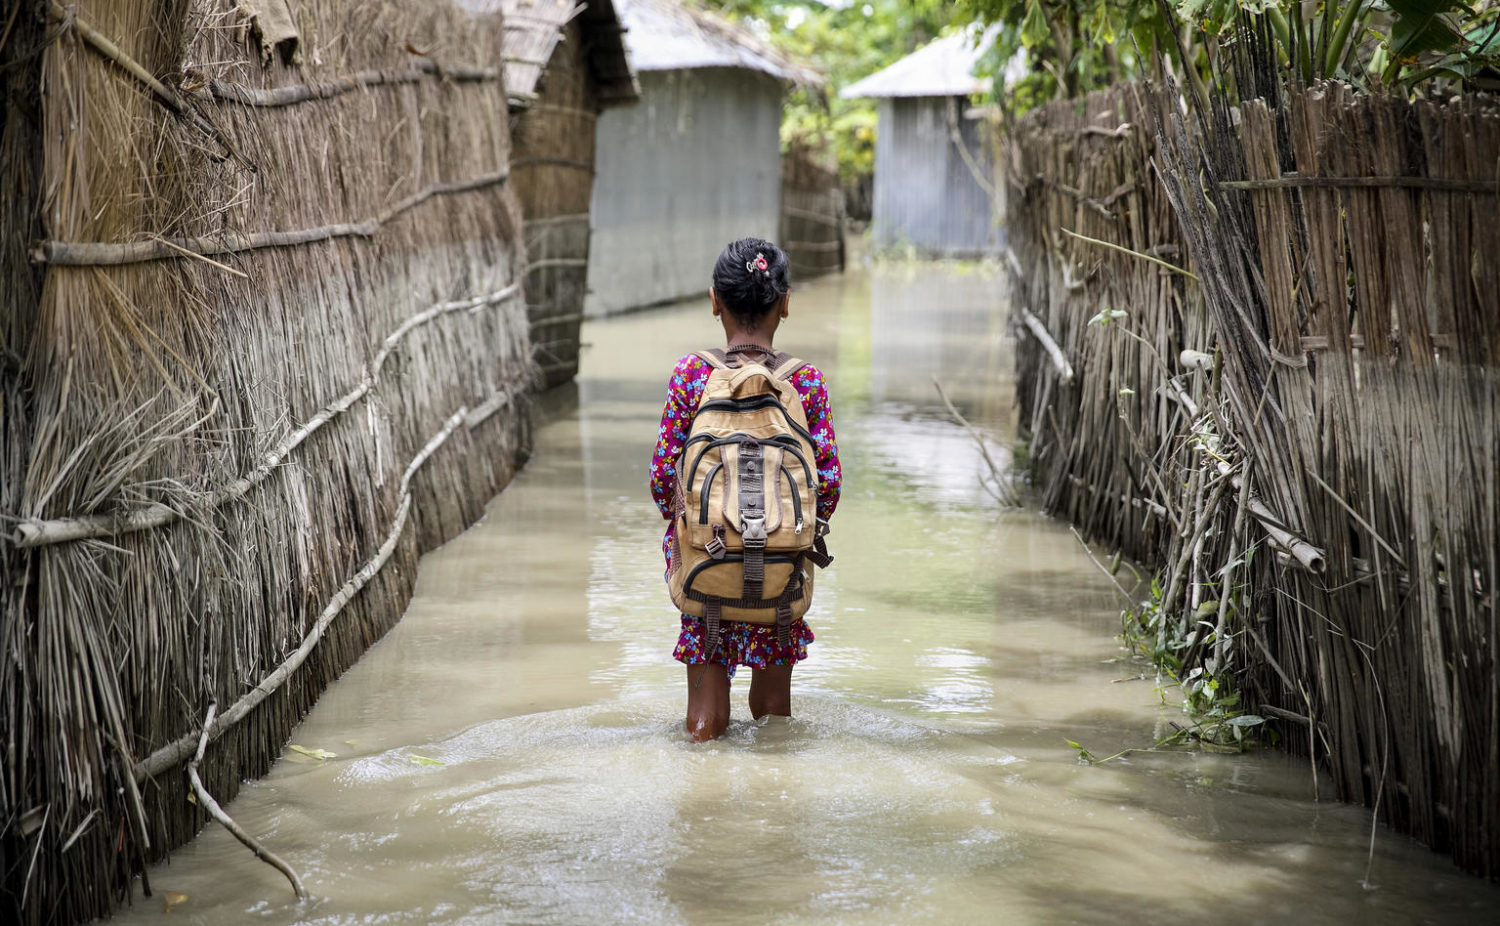 Nearly 1Bln children at ‘extremely high risk’ globally because of climate Change, UNICEF warns